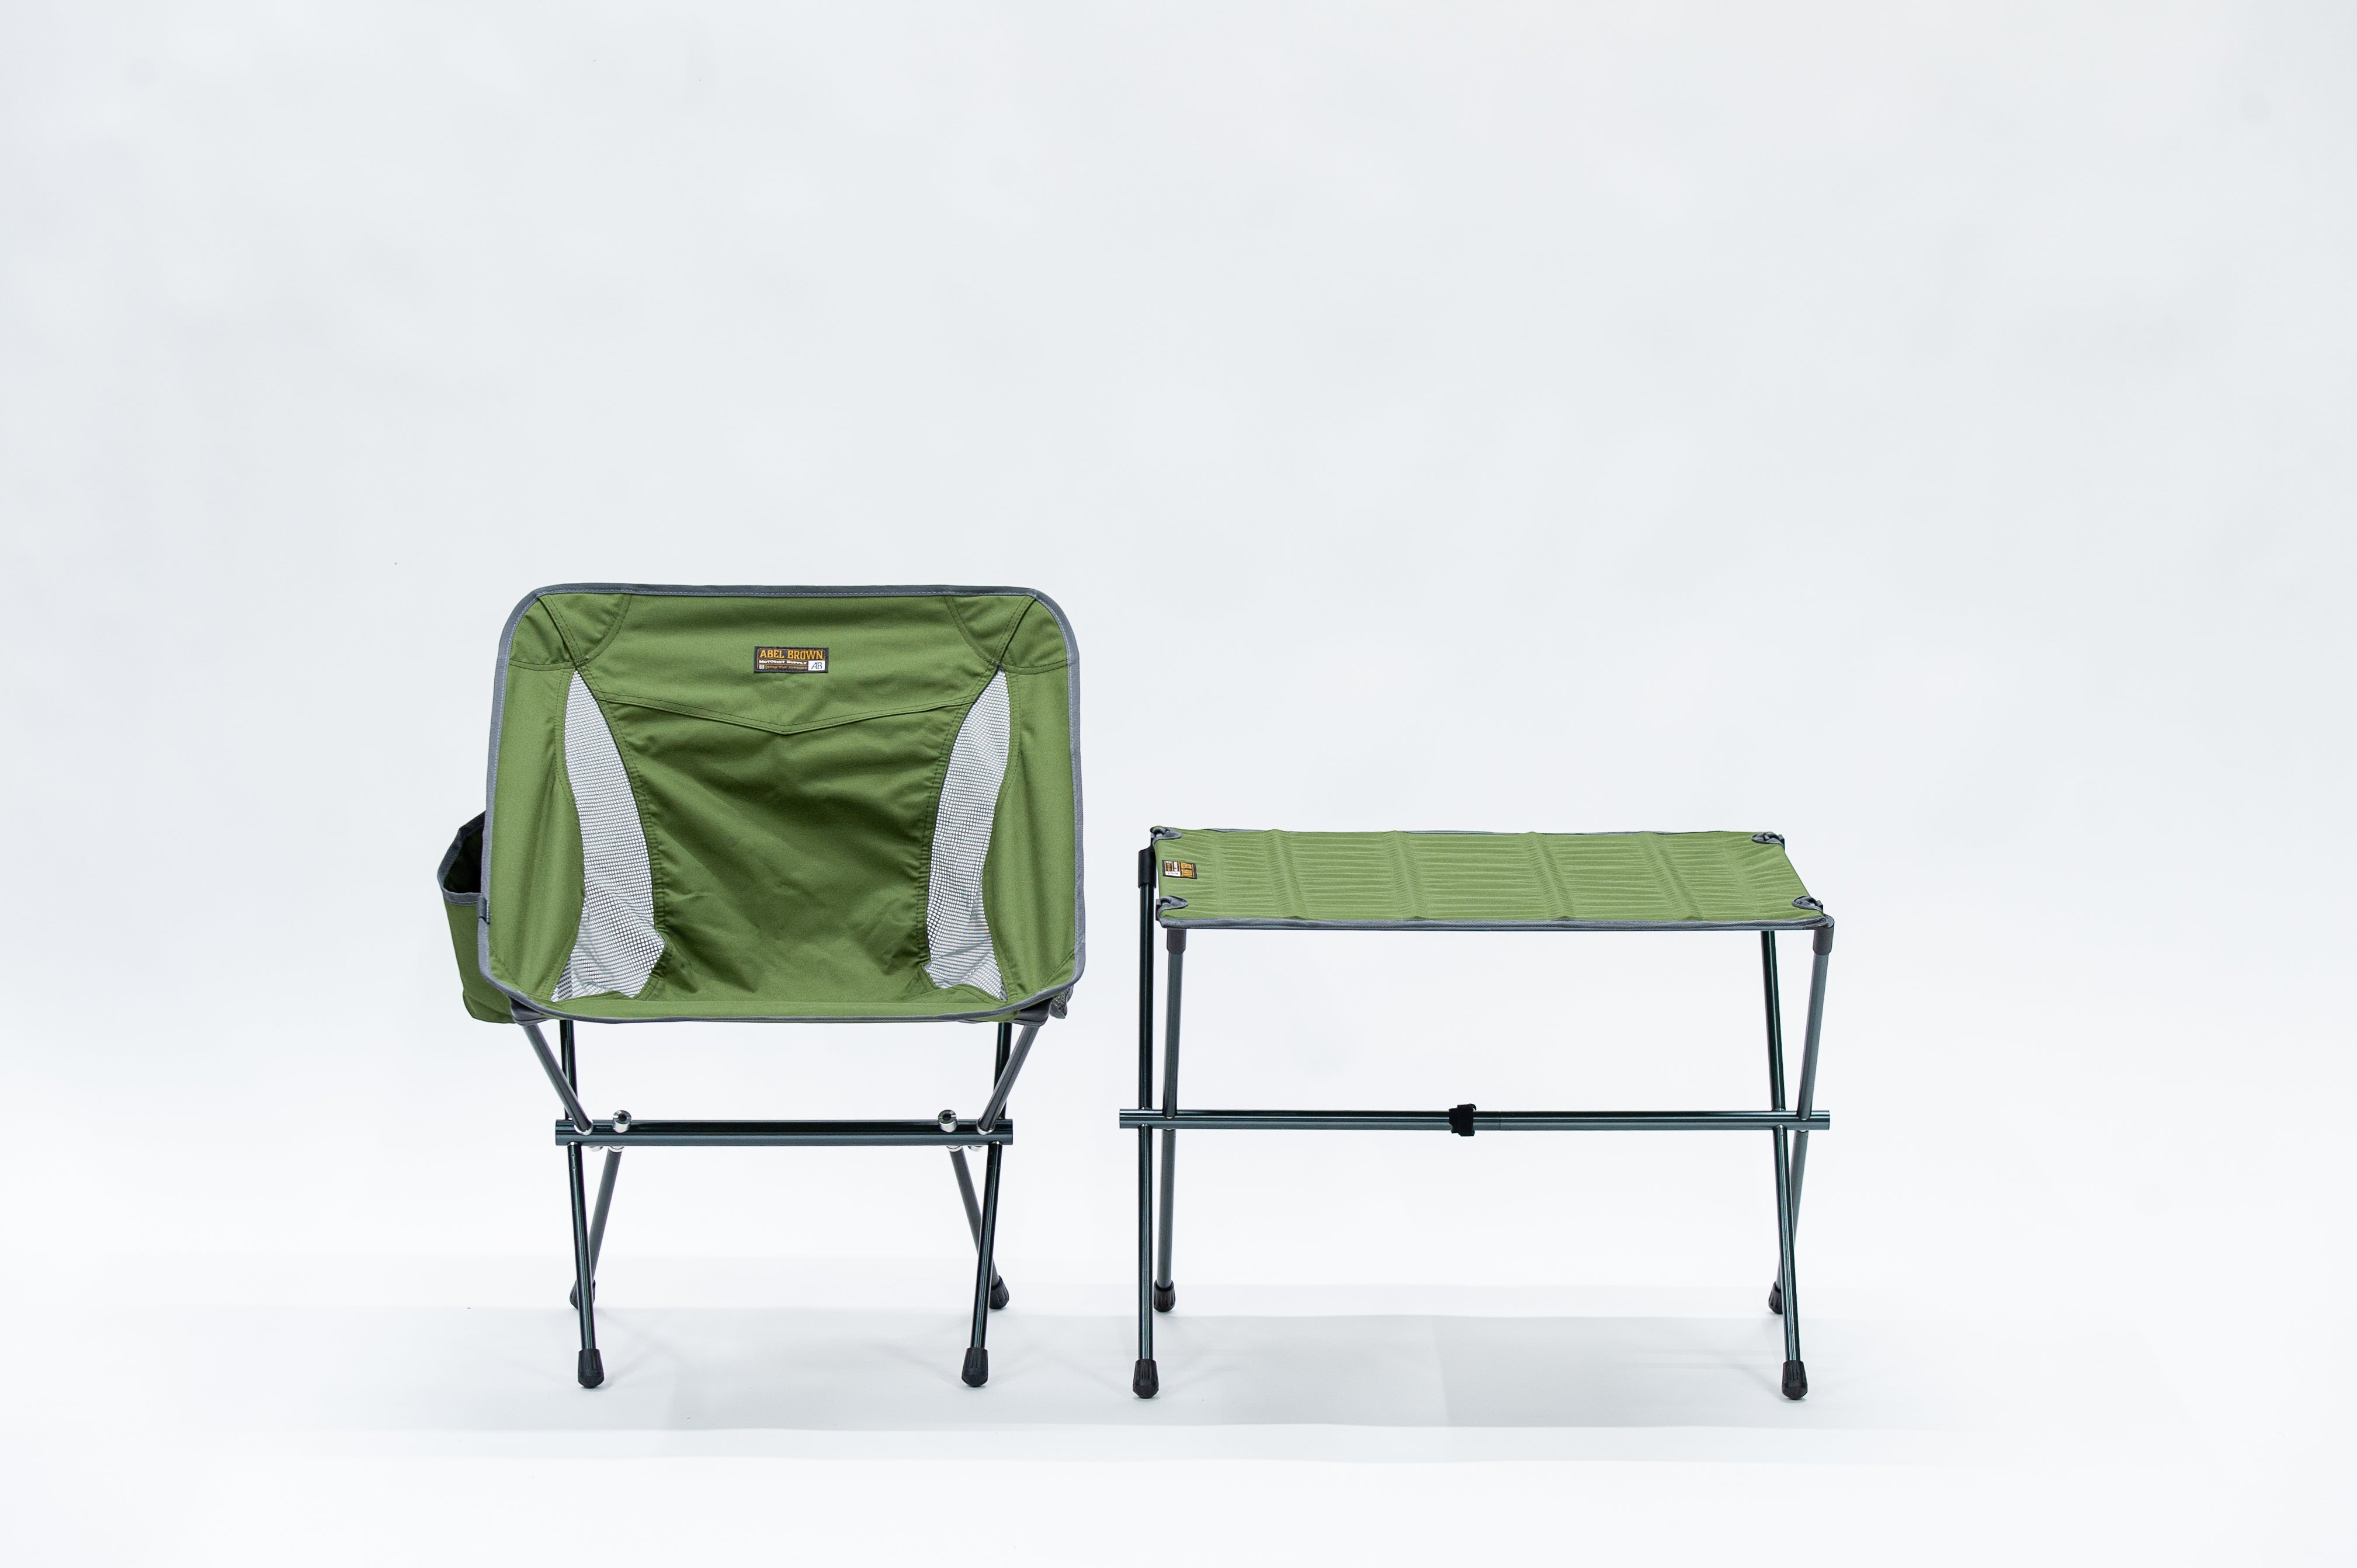 Nomad Camp Combo - Tent + Table + Chair